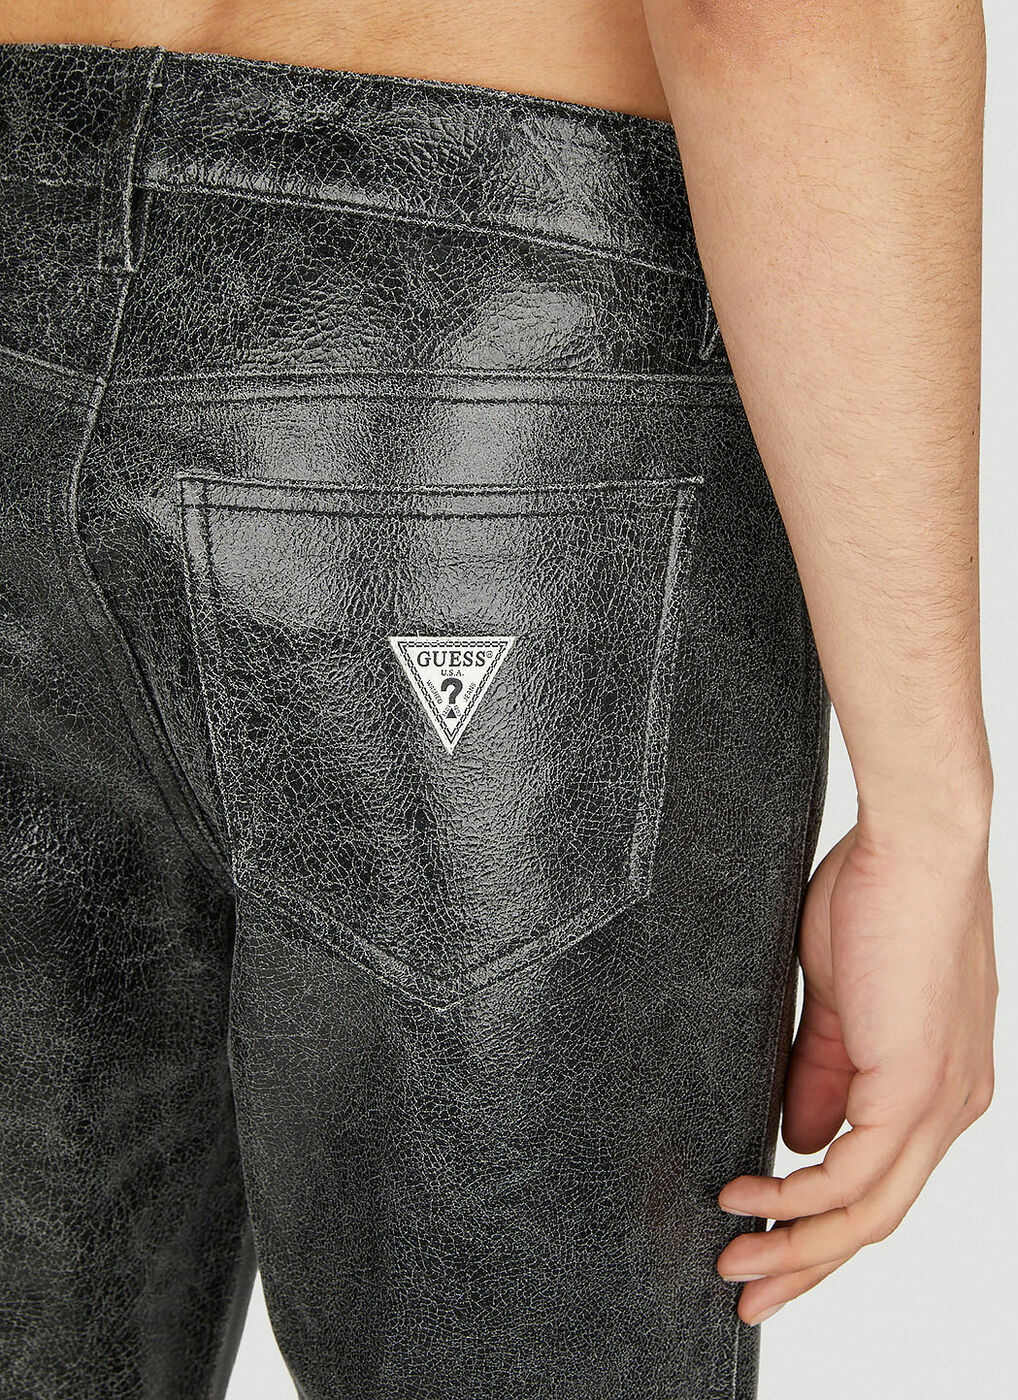 Guess USA - Cracked Leather Pants in Black GUESS